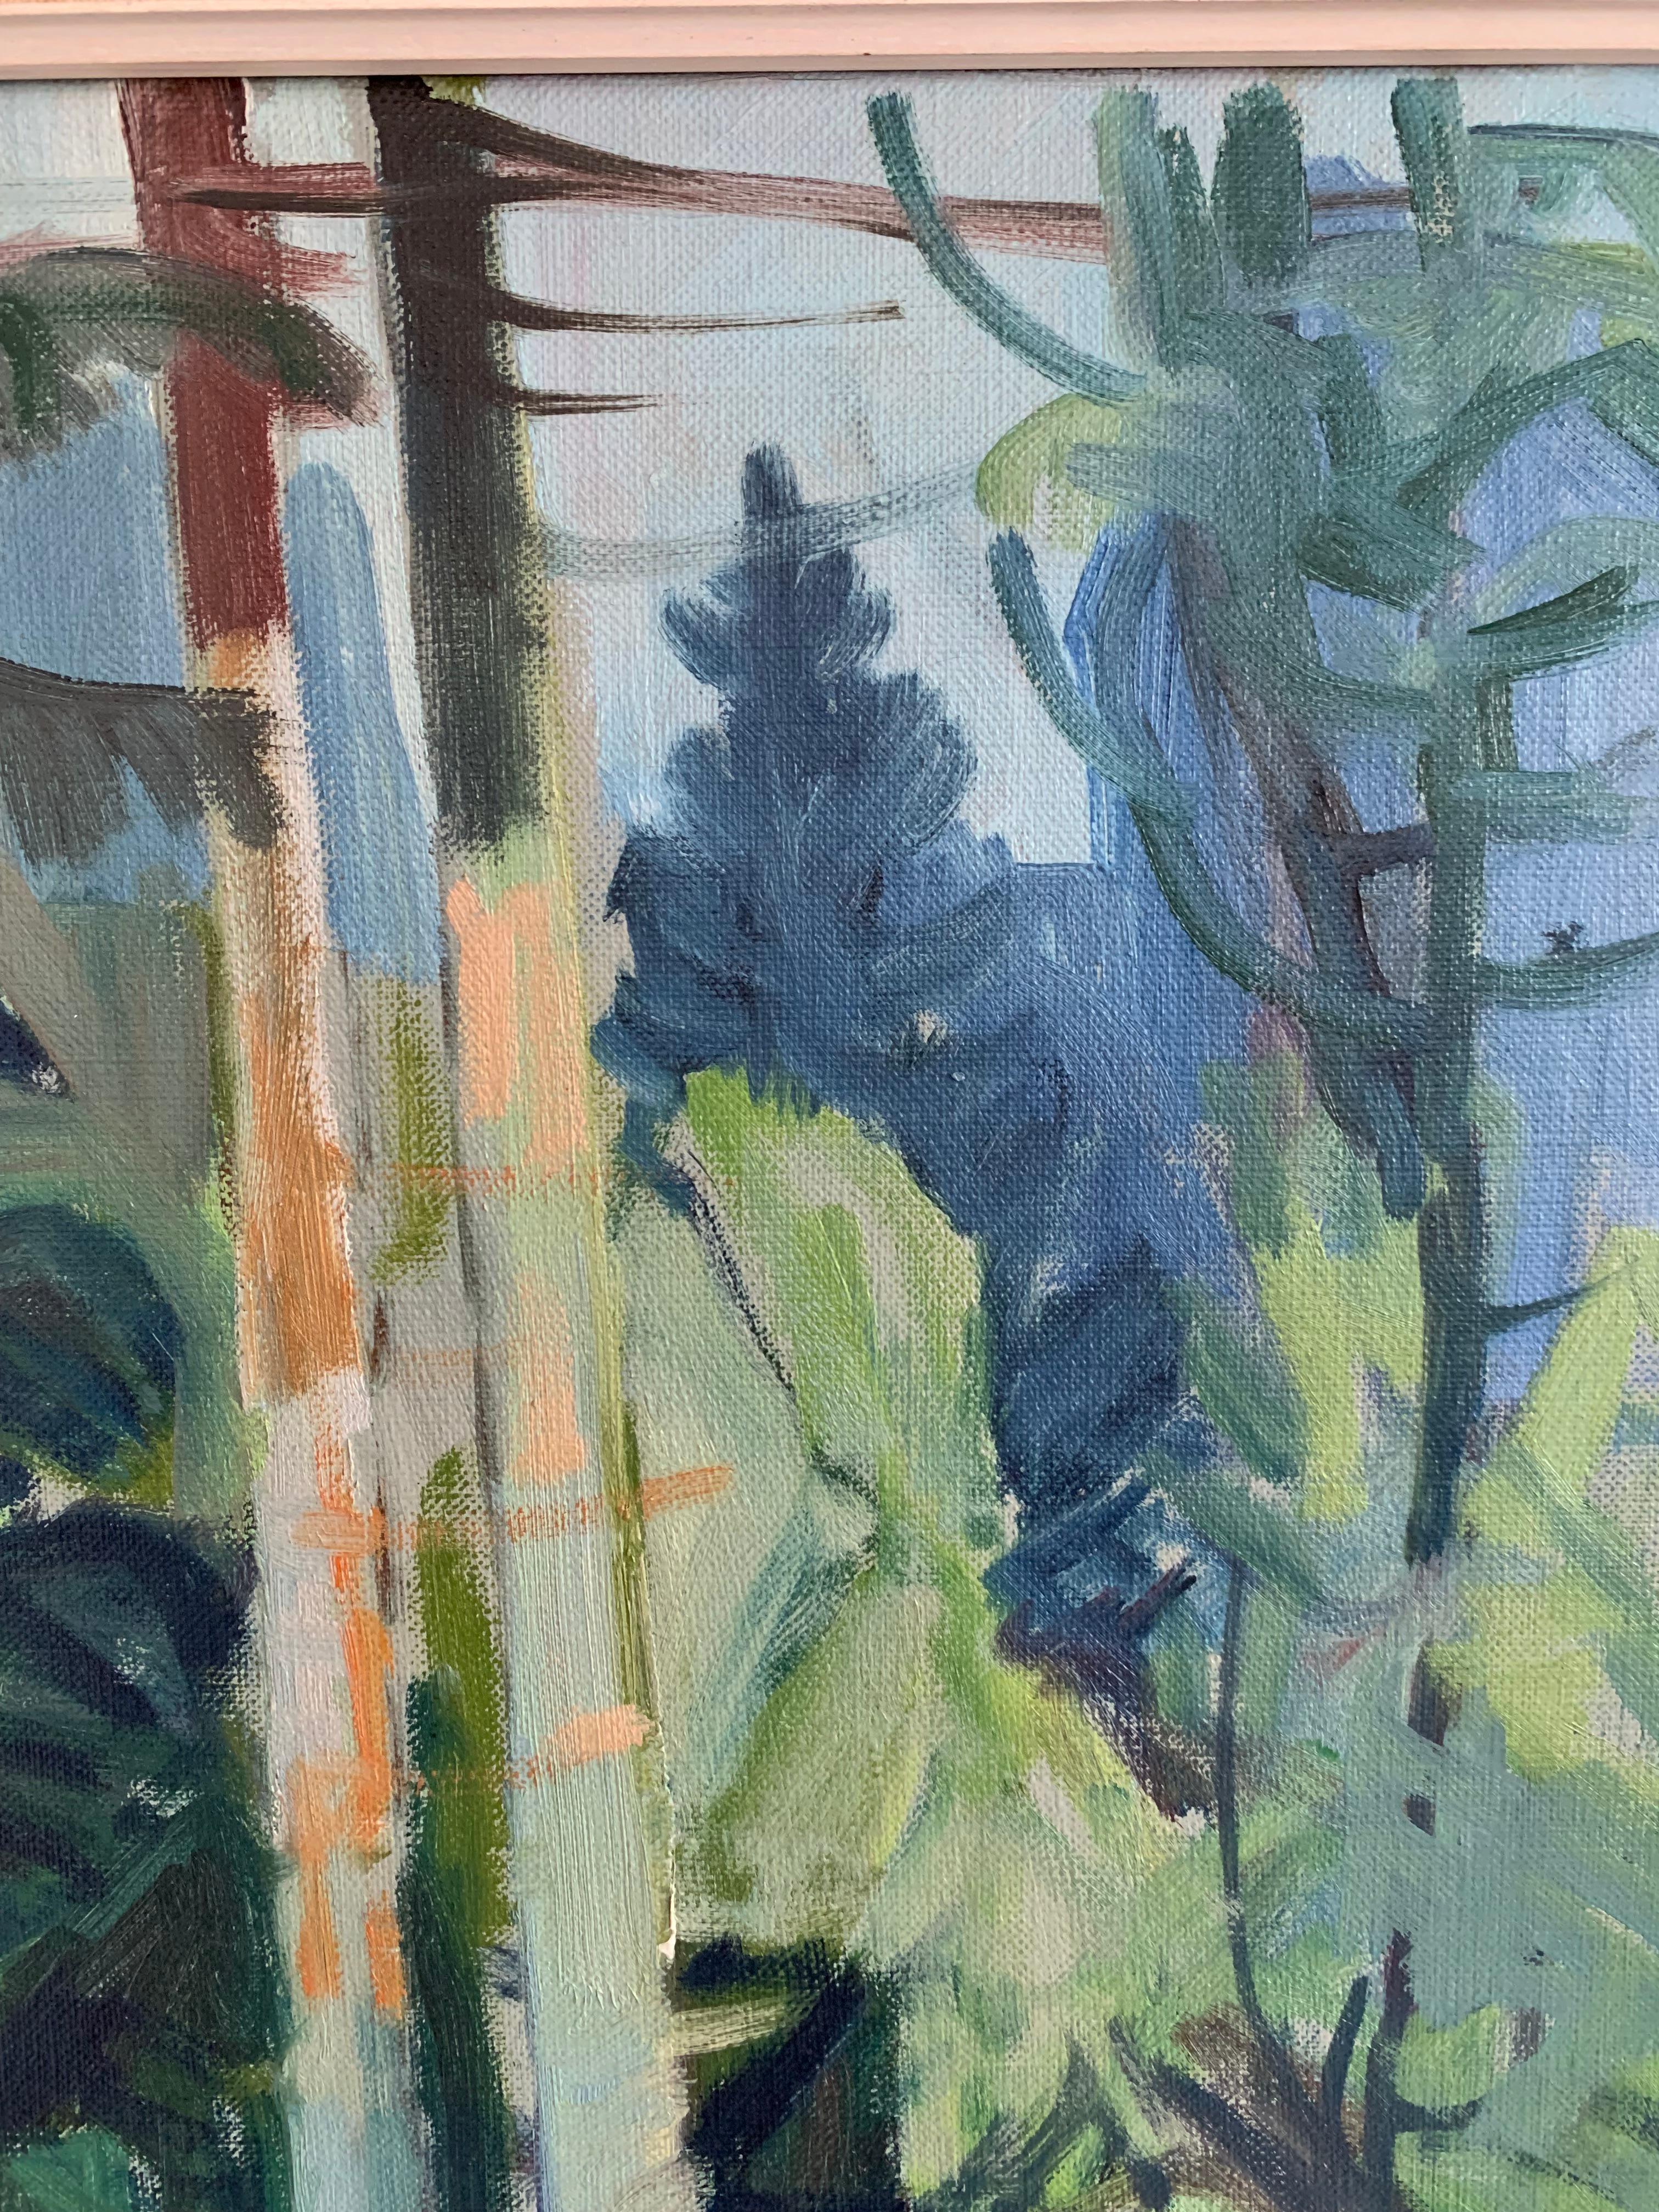 Hand-Painted 1950's Danish Modern 'Forest' Painting by Nis Stougaard